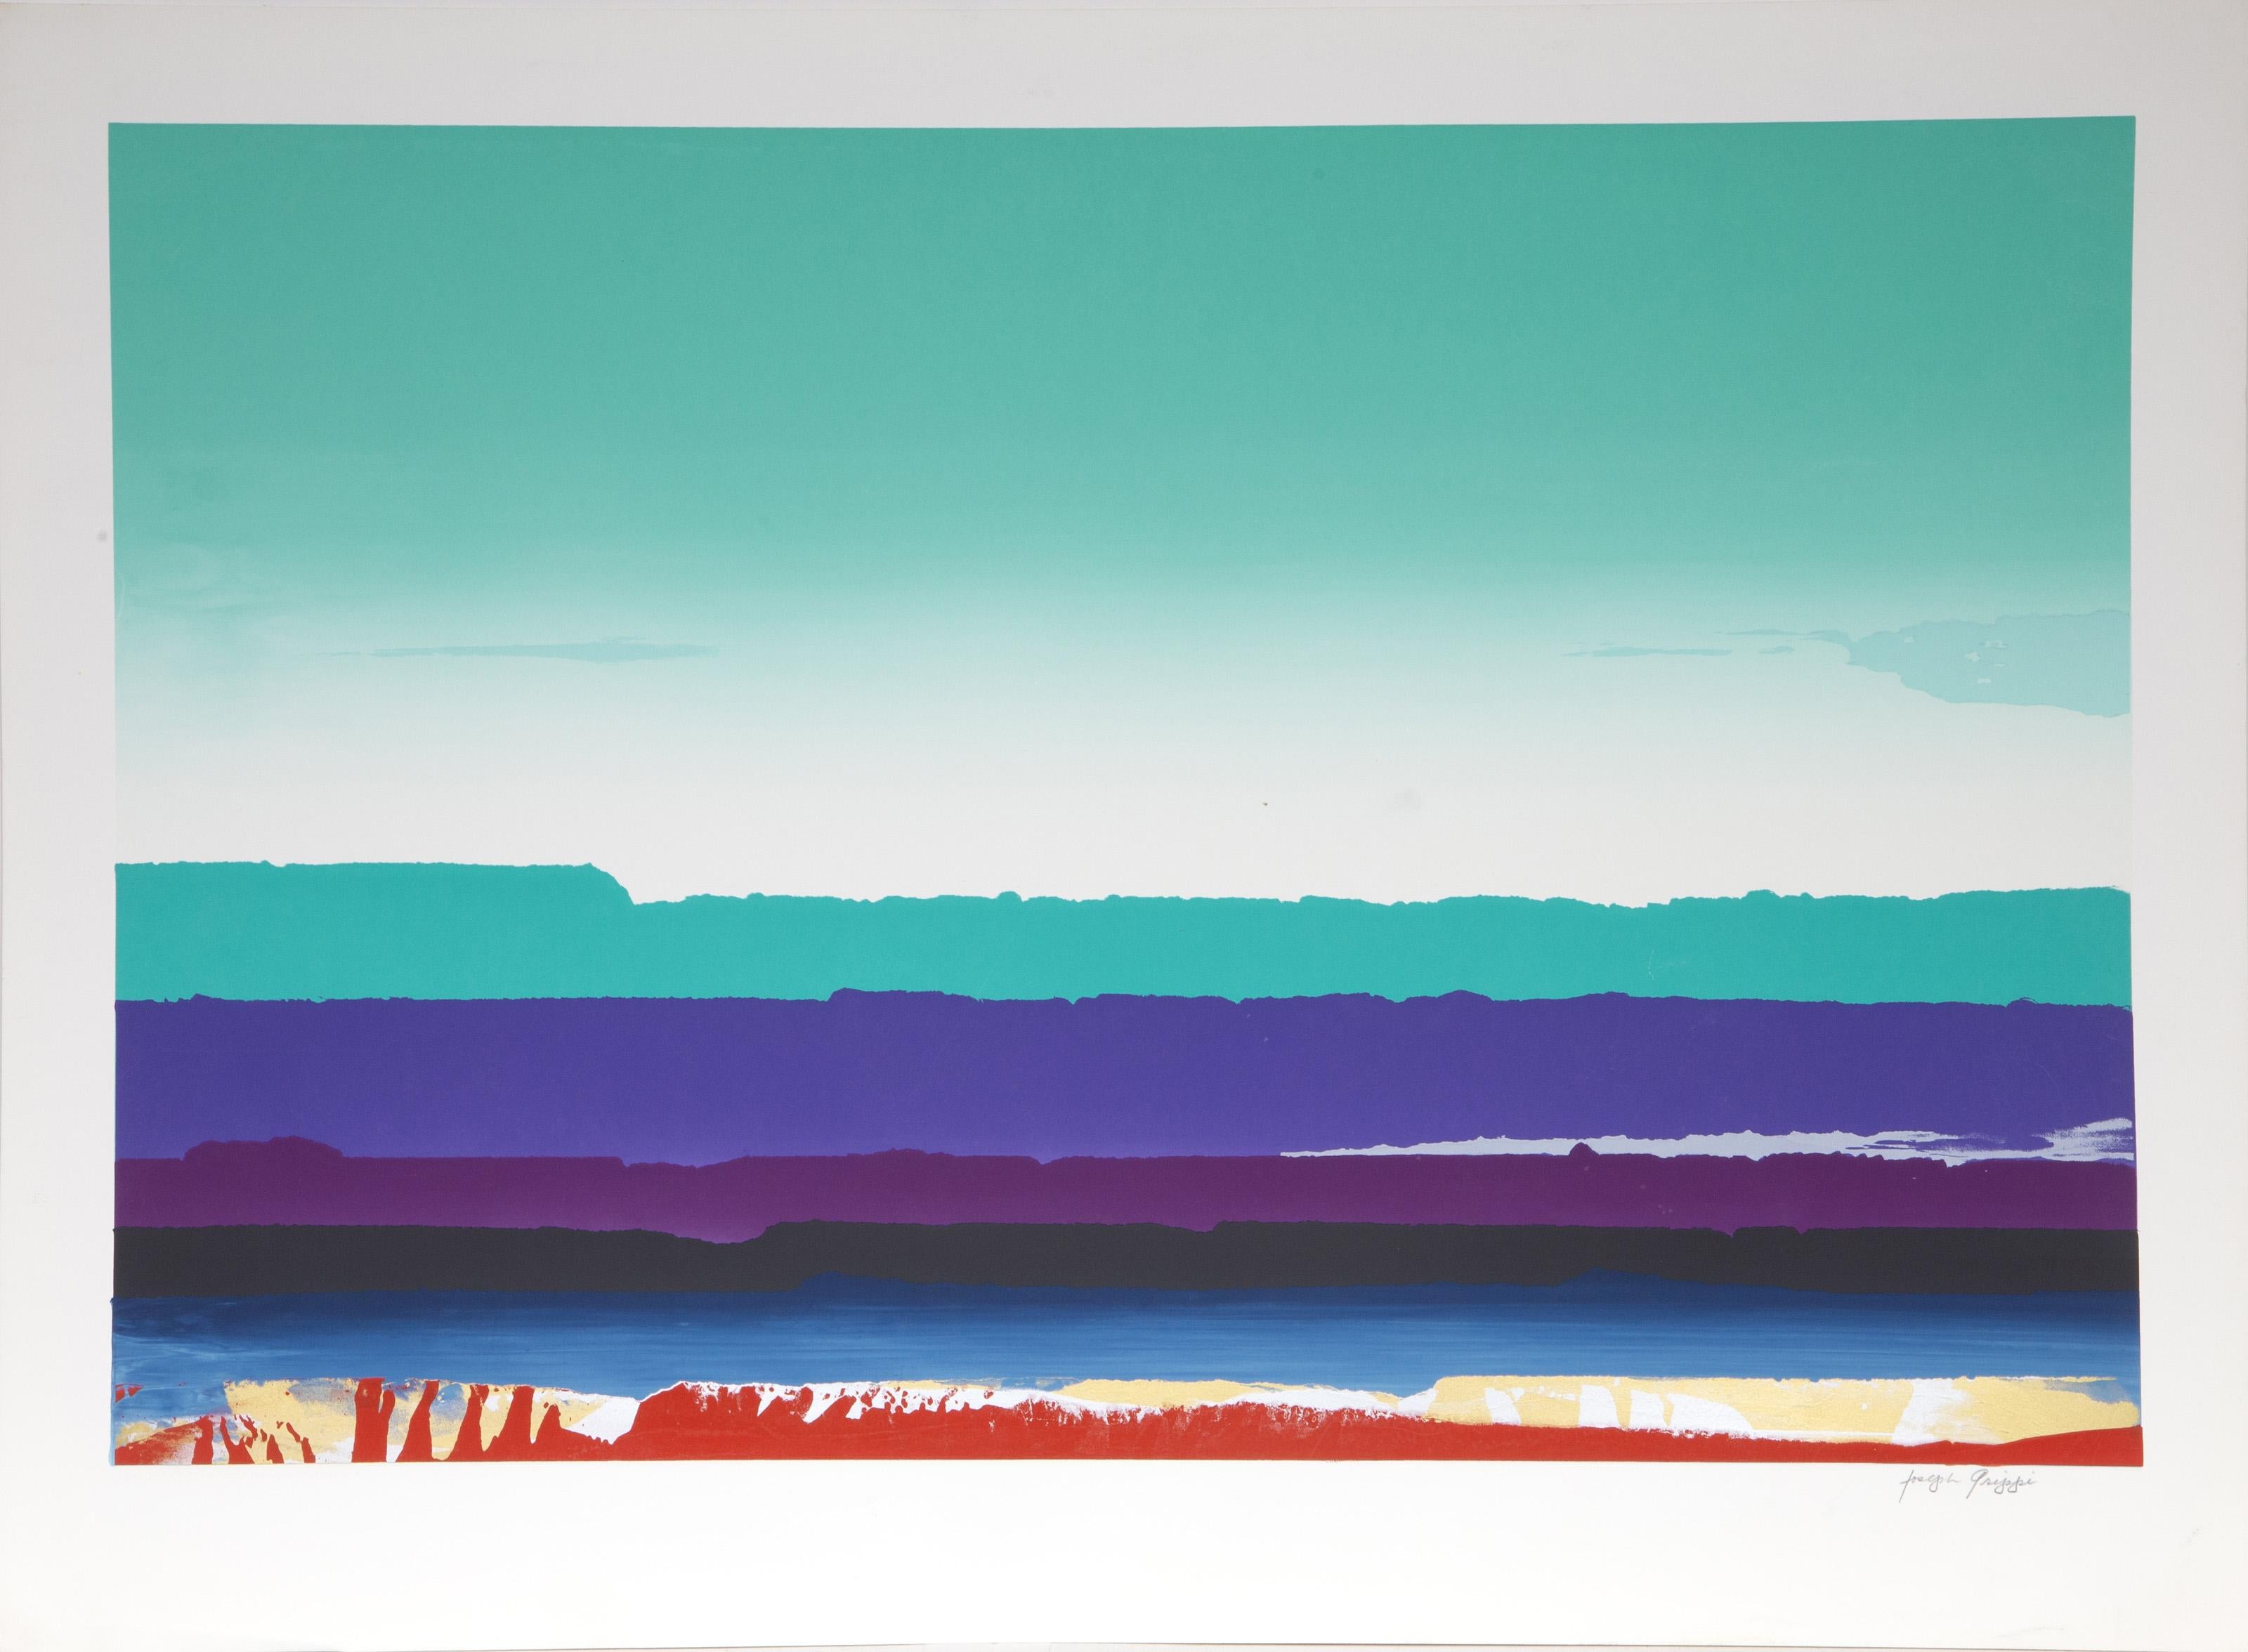 Landscape in Green, Blue and Purple
Joseph Grippi, American (1924–2001)
Screenprint, signed in pencil
Image Size: 20 x 30 inches
Size: 24.5 x 33.25 in. (62.23 x 84.46 cm)